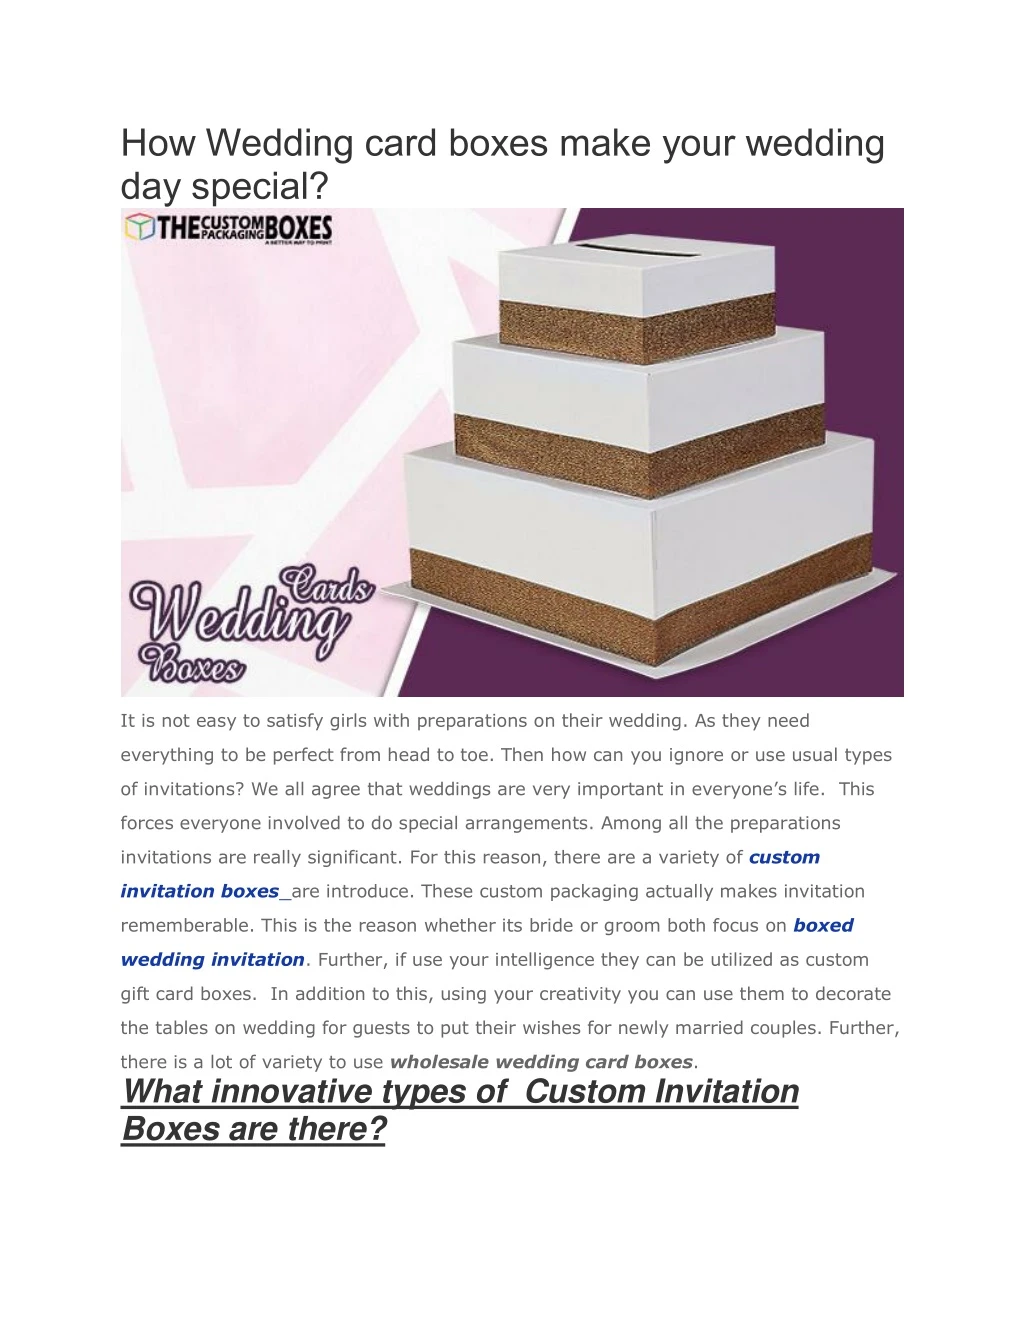 how wedding card boxes make your wedding